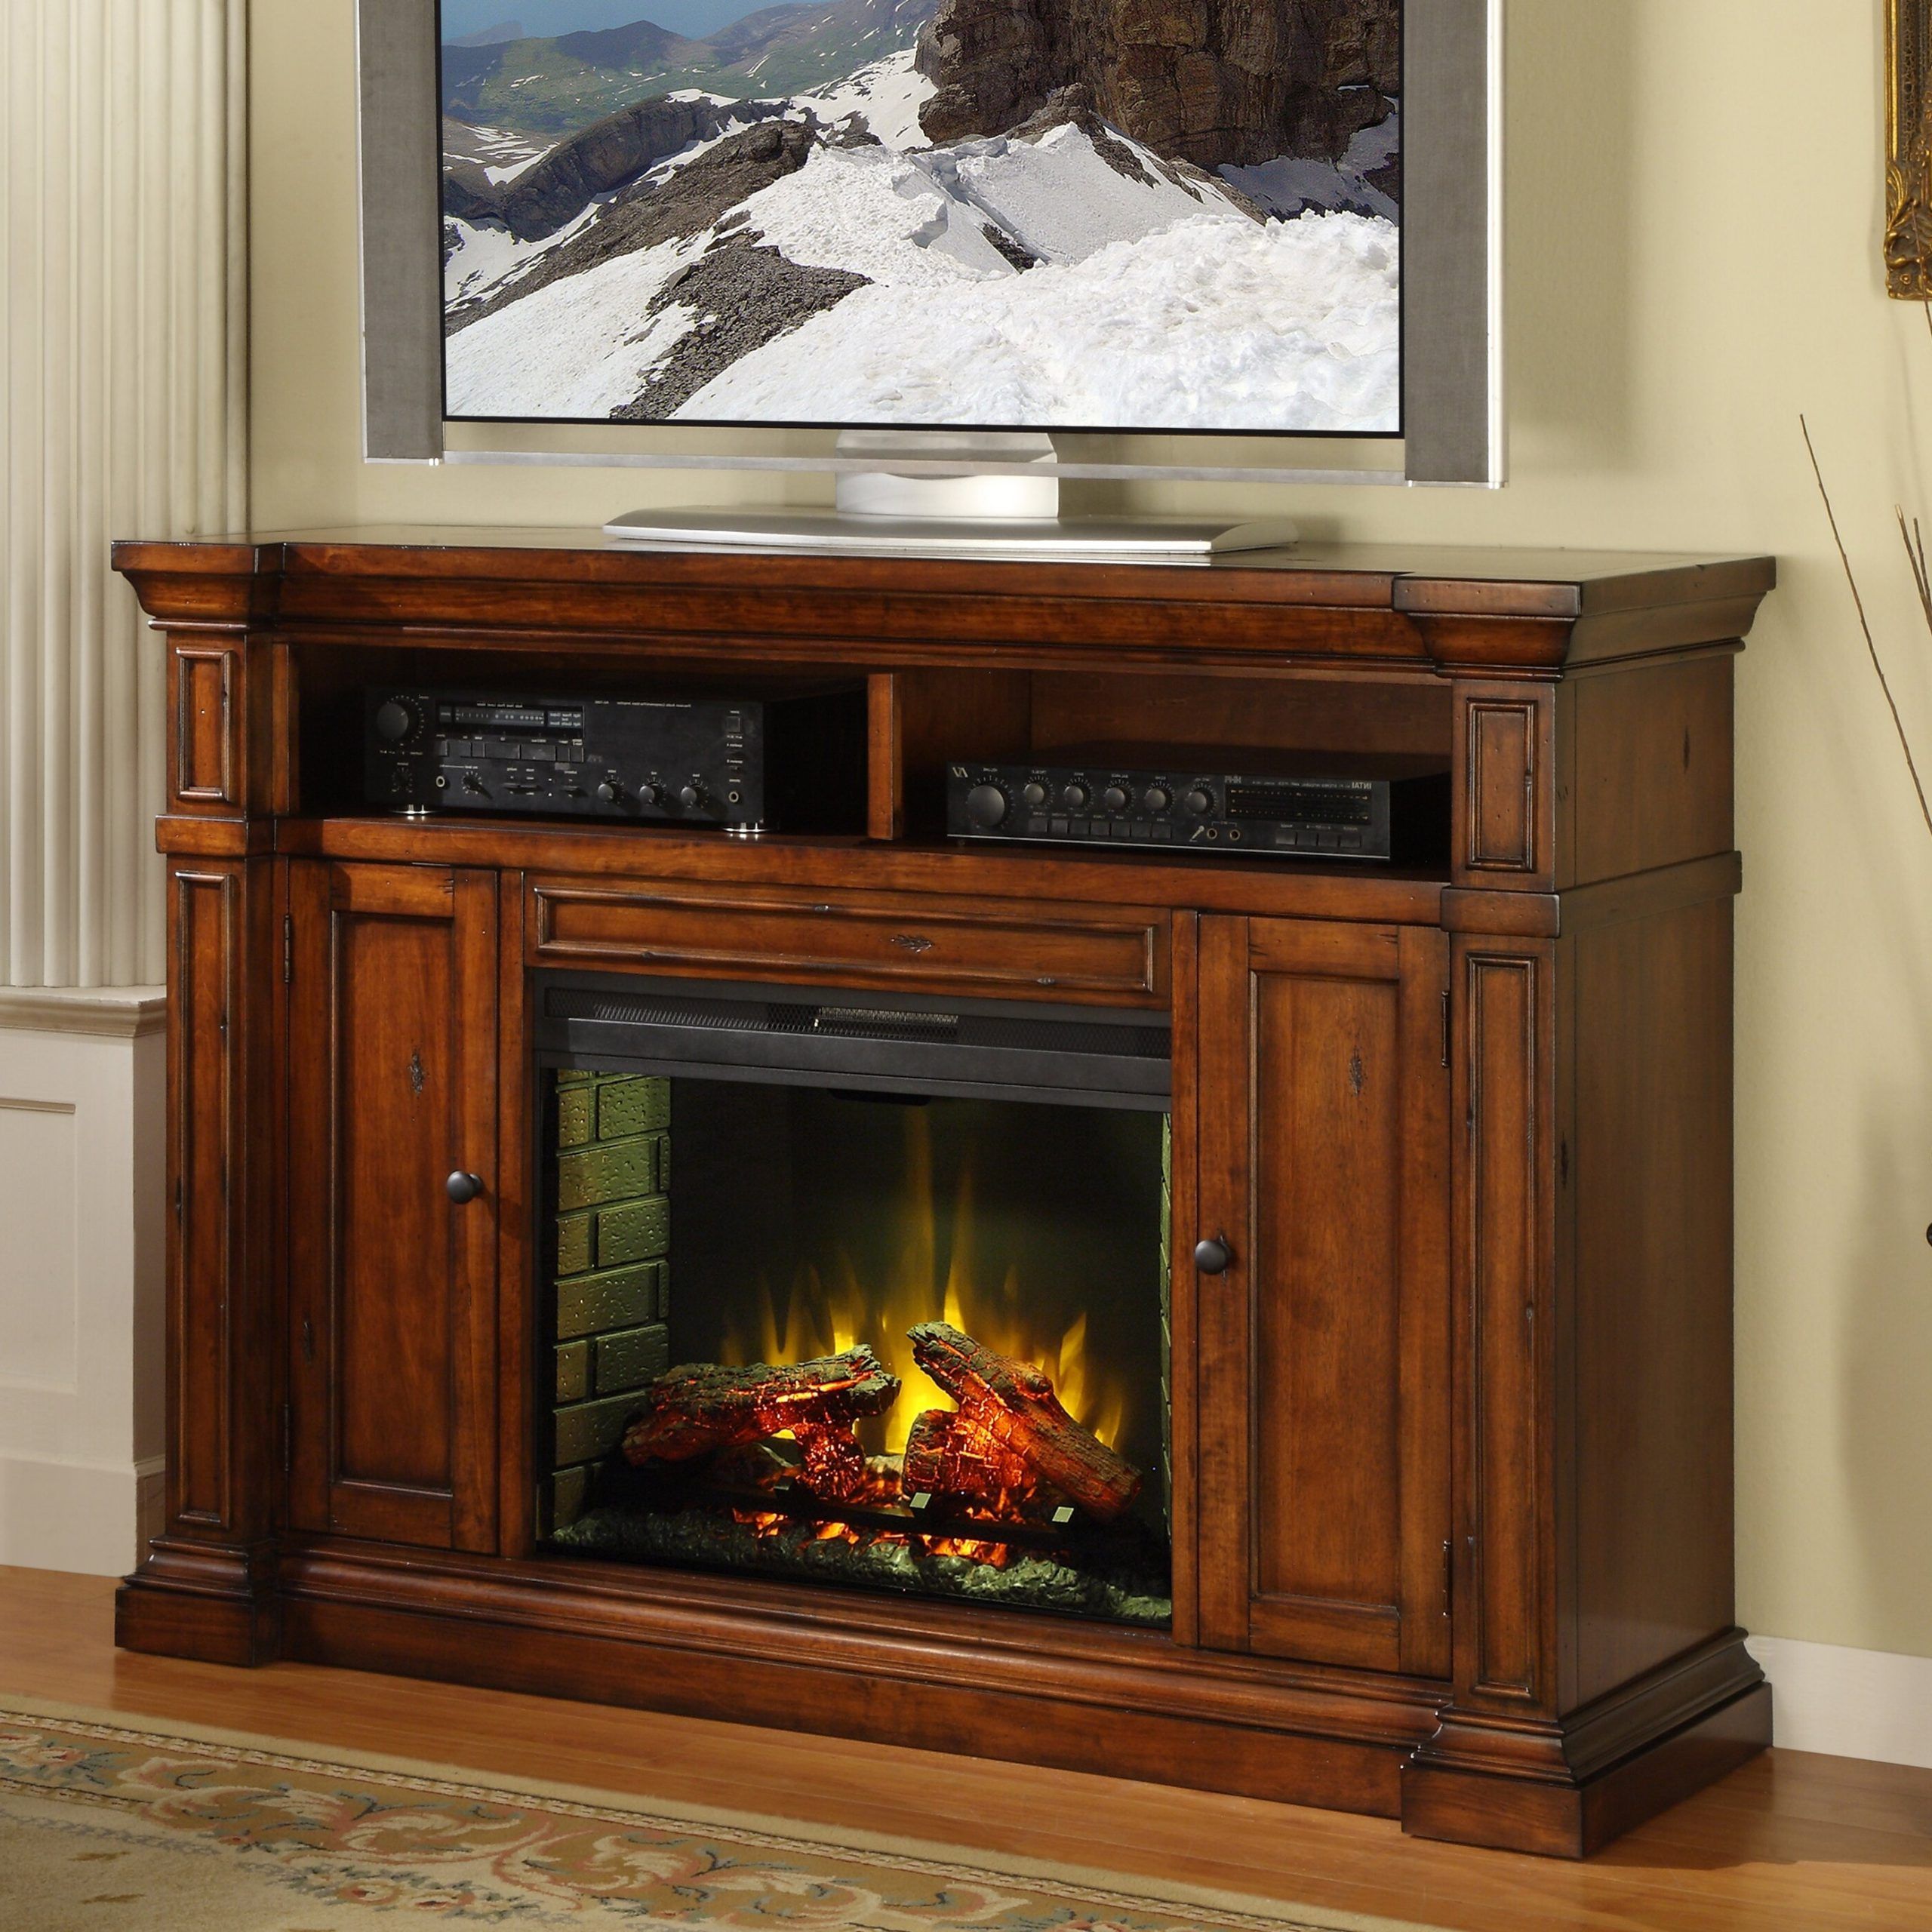 Legends Furniture Berkshire Tv Stand With Electric Fireplace & Reviews Pertaining To Popular Electric Fireplace Tv Stands (View 14 of 15)